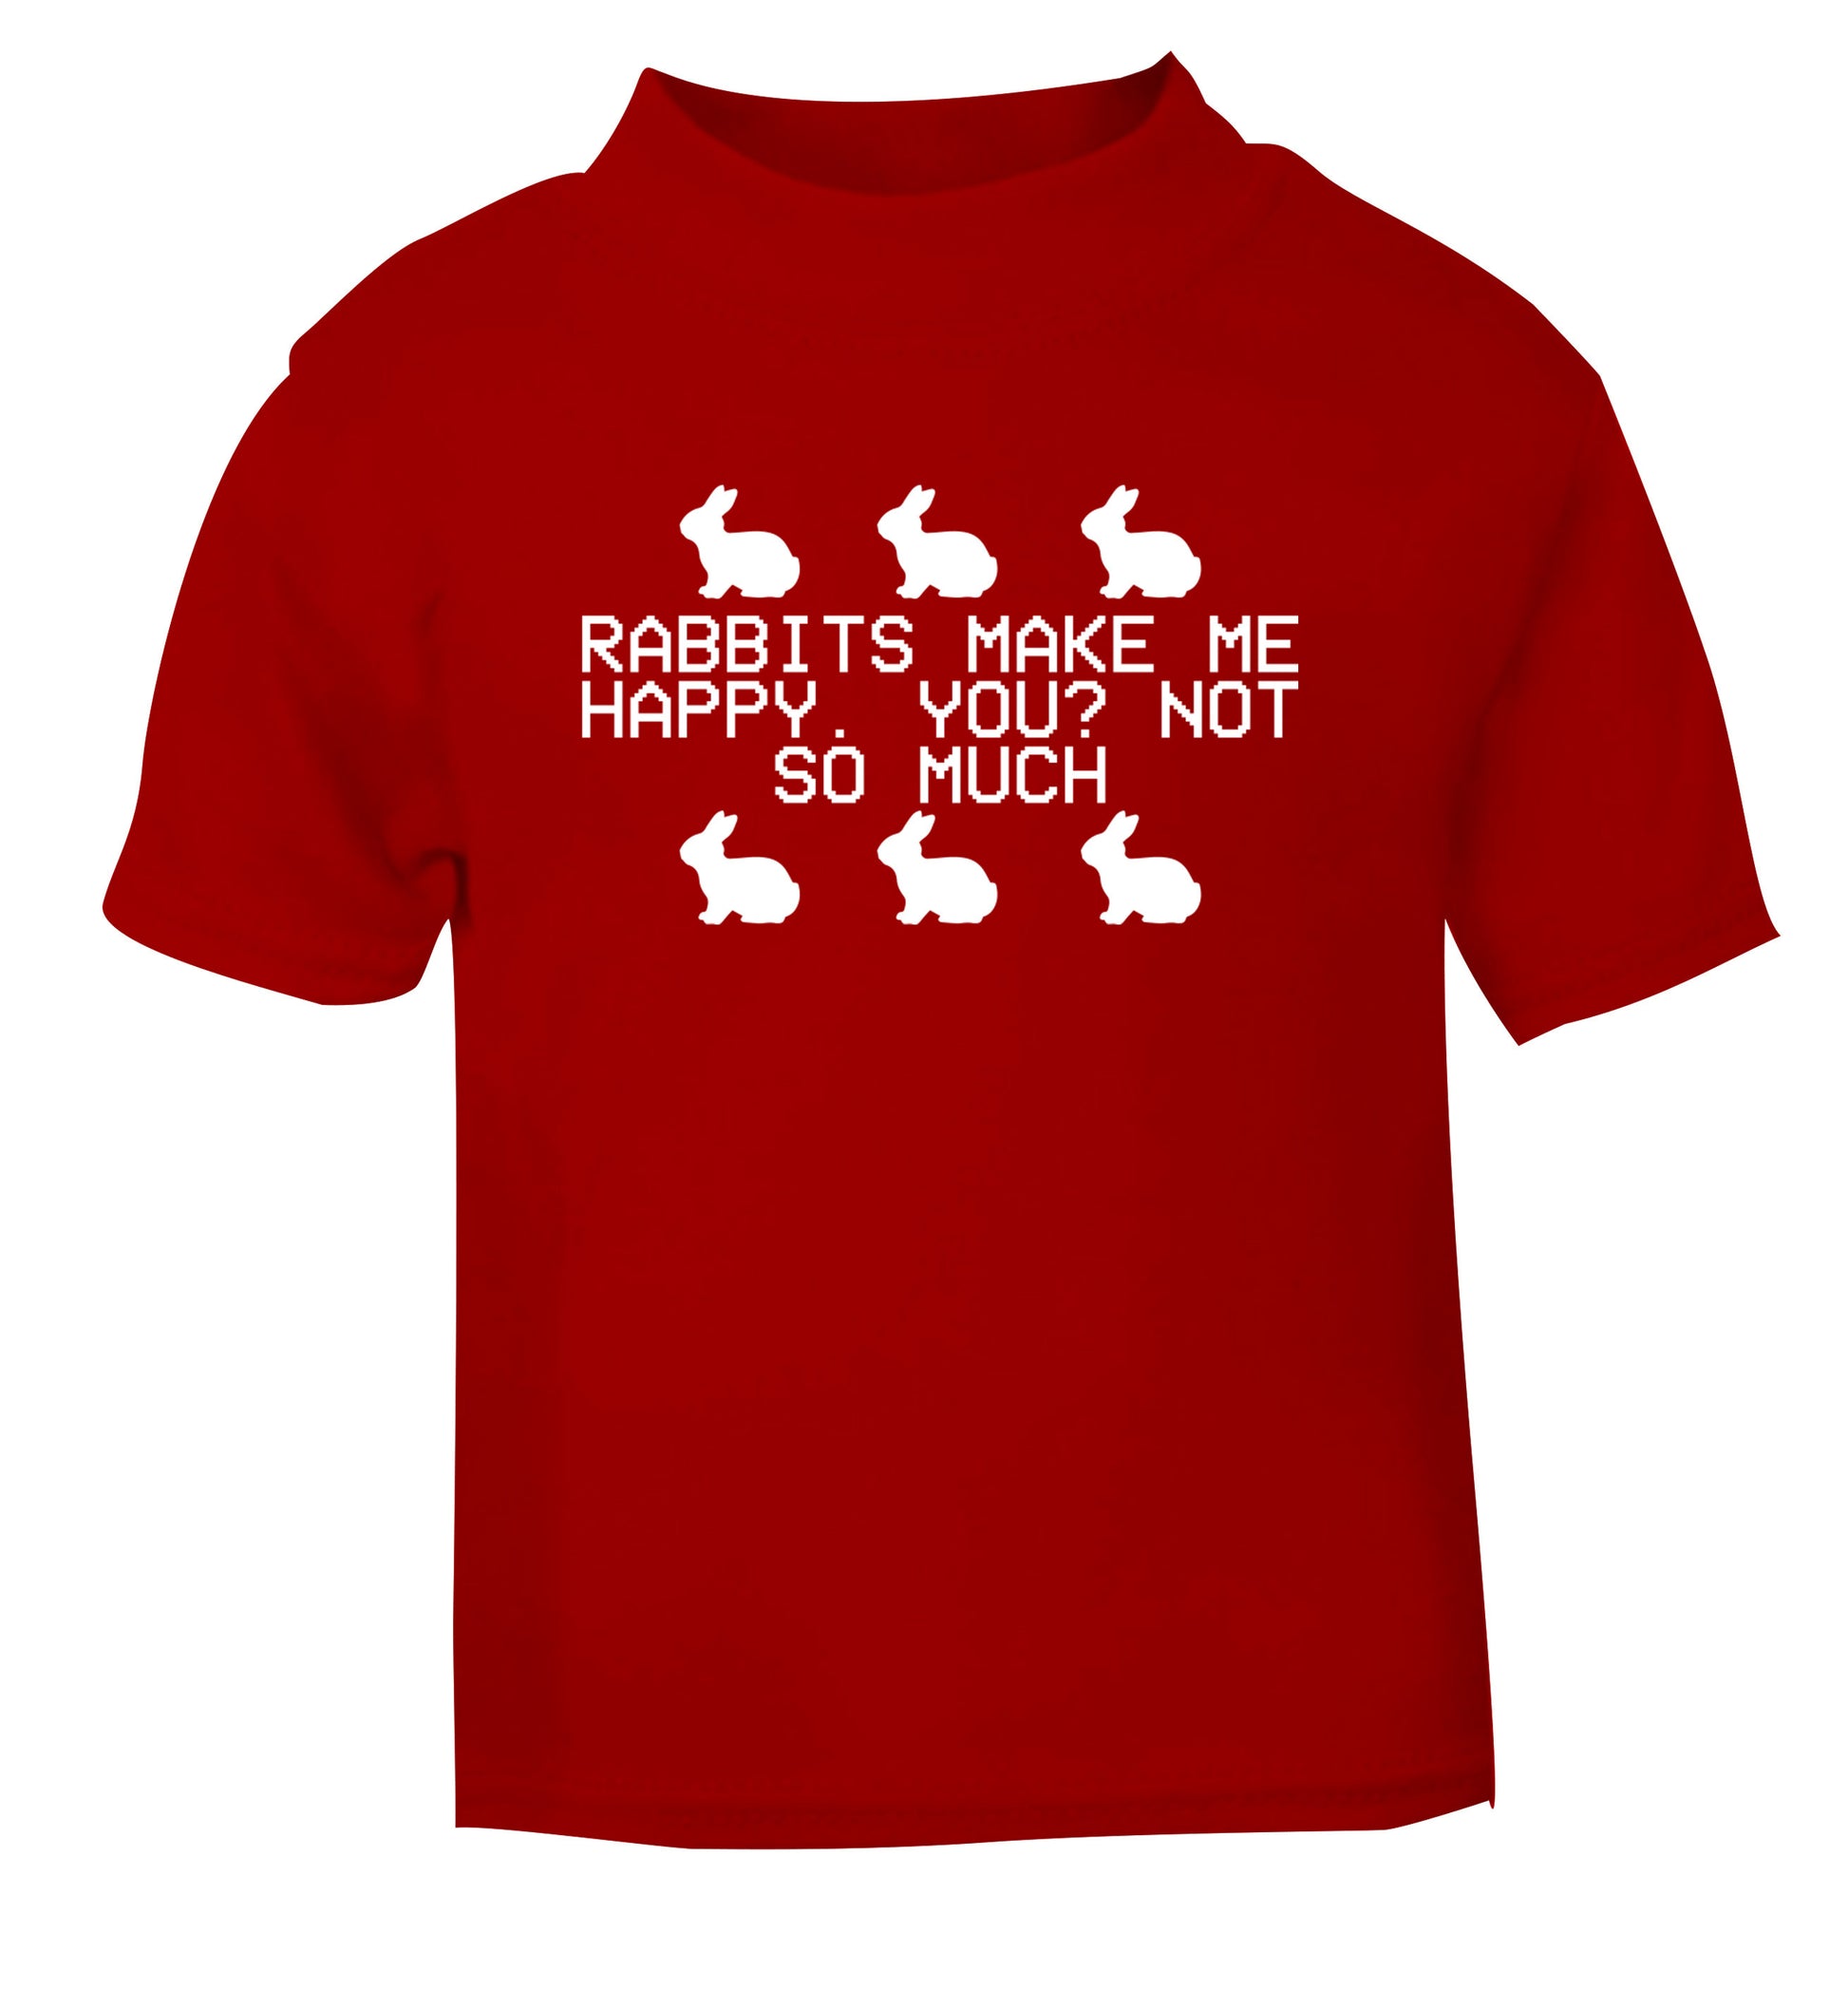 Rabbits make me happy, you not so much red Baby Toddler Tshirt 2 Years